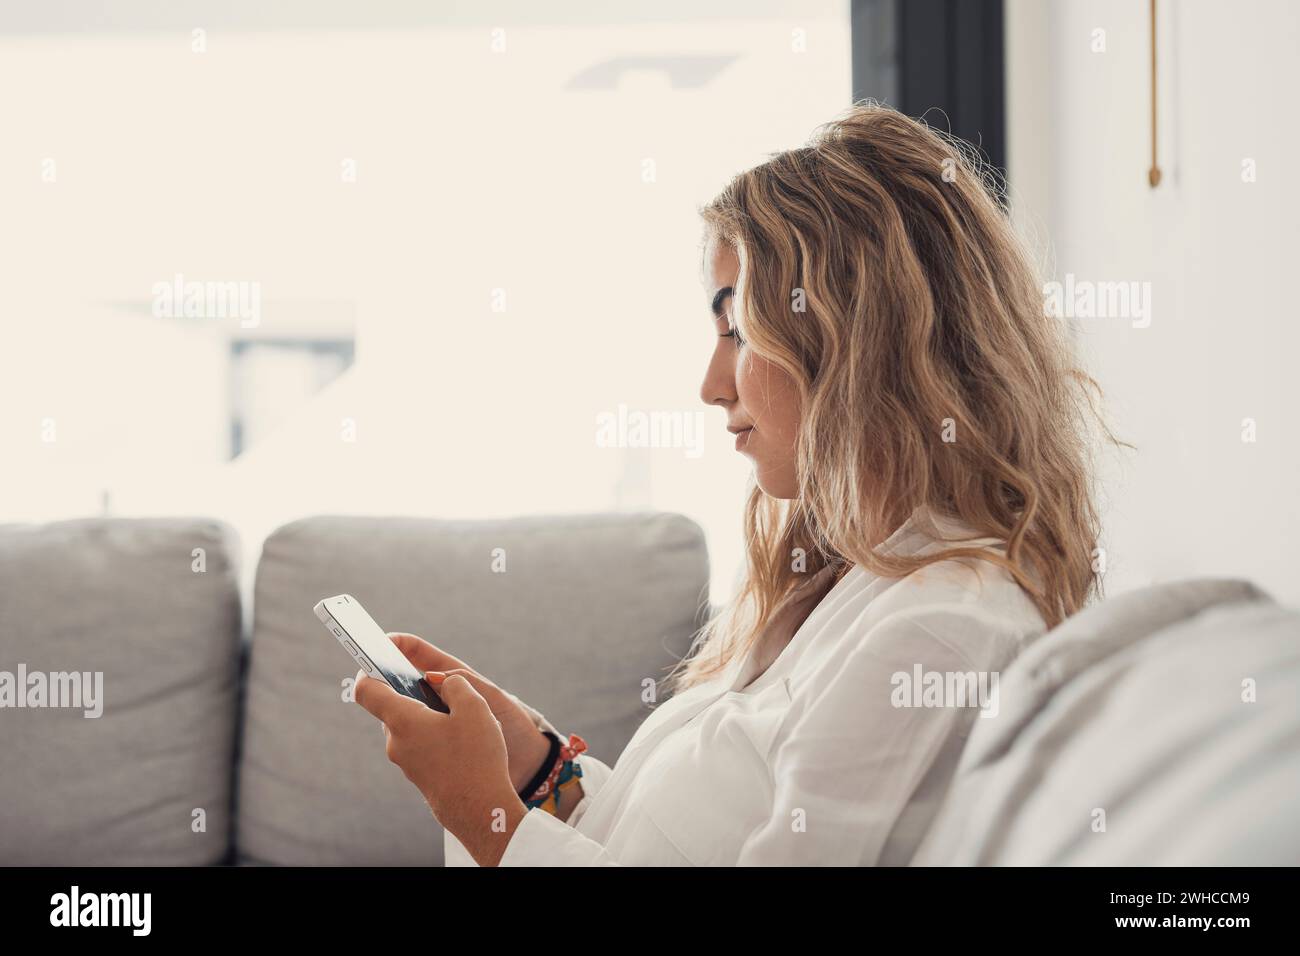 Portrait of one young attractive blonde woman using phone cell on couch relaxing surfing the net at home. Relaxing online concept lifestyle Stock Photo